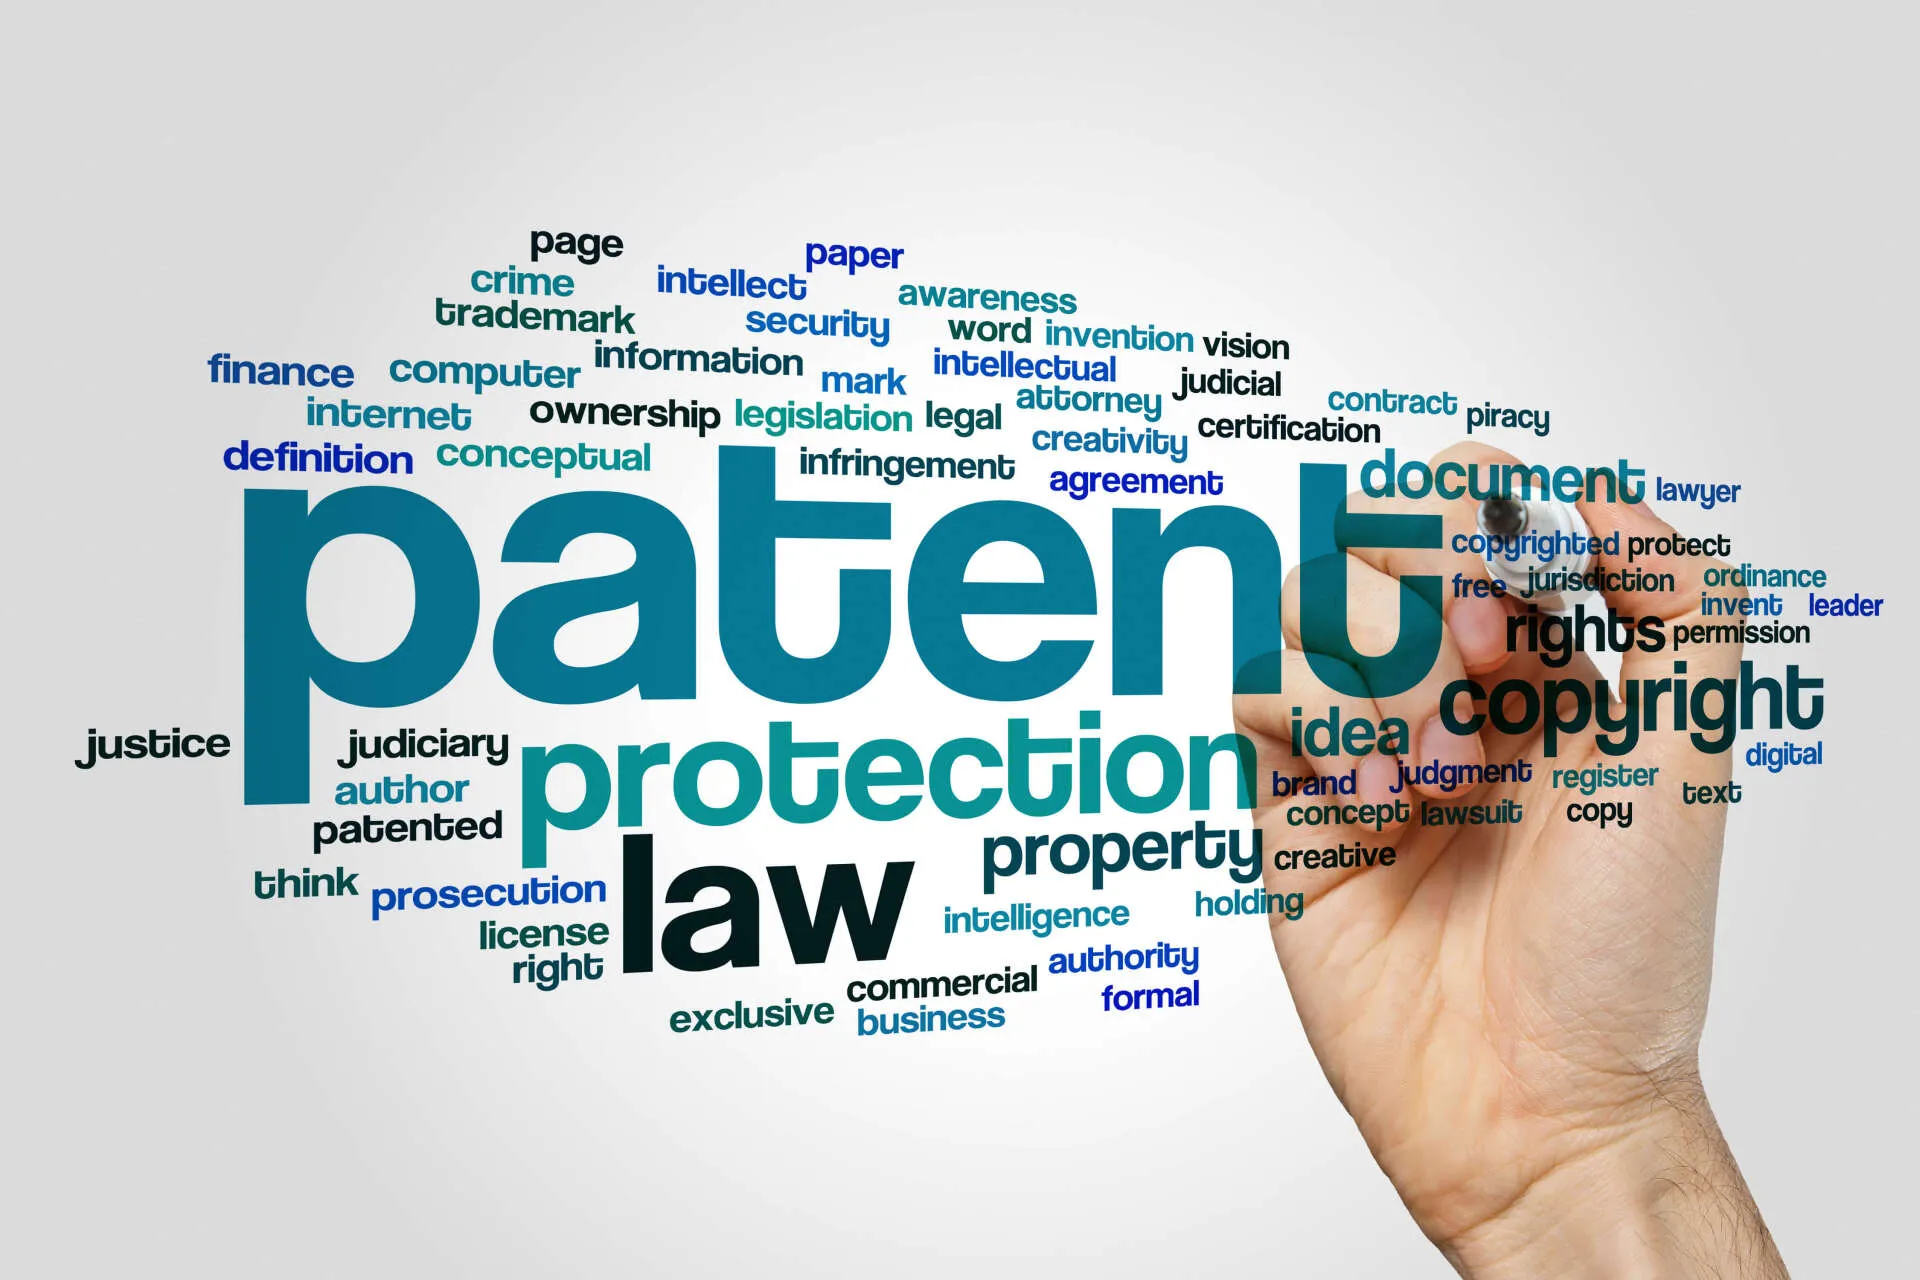 Why Do I Need an Intellectual Property Lawyer?